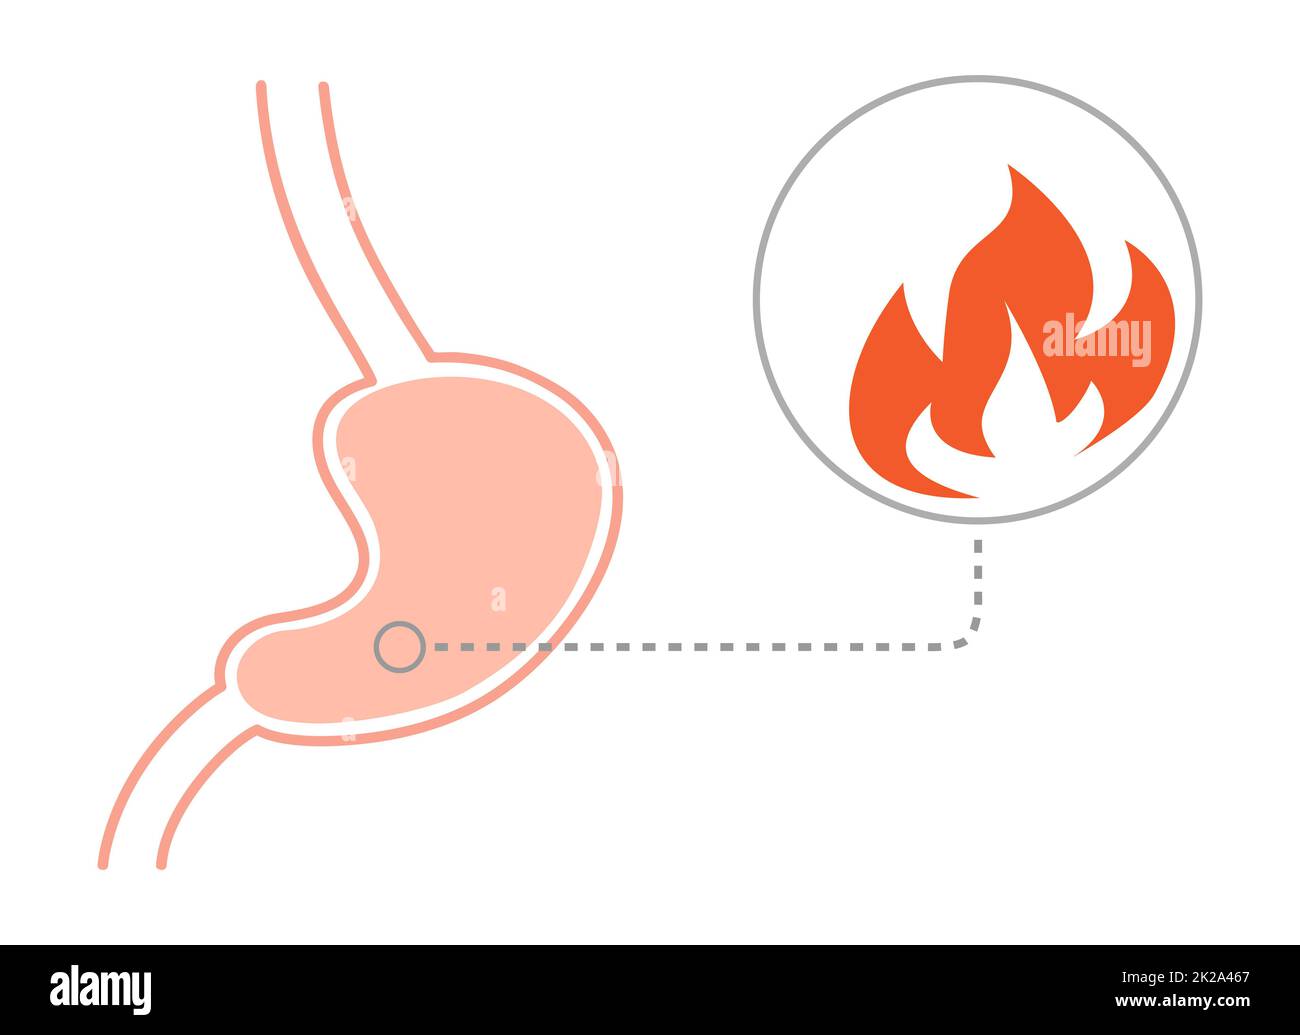 Acid reflux disease concept. Human stomach on fire, cut view. Vector illustration in flat style Stock Photo